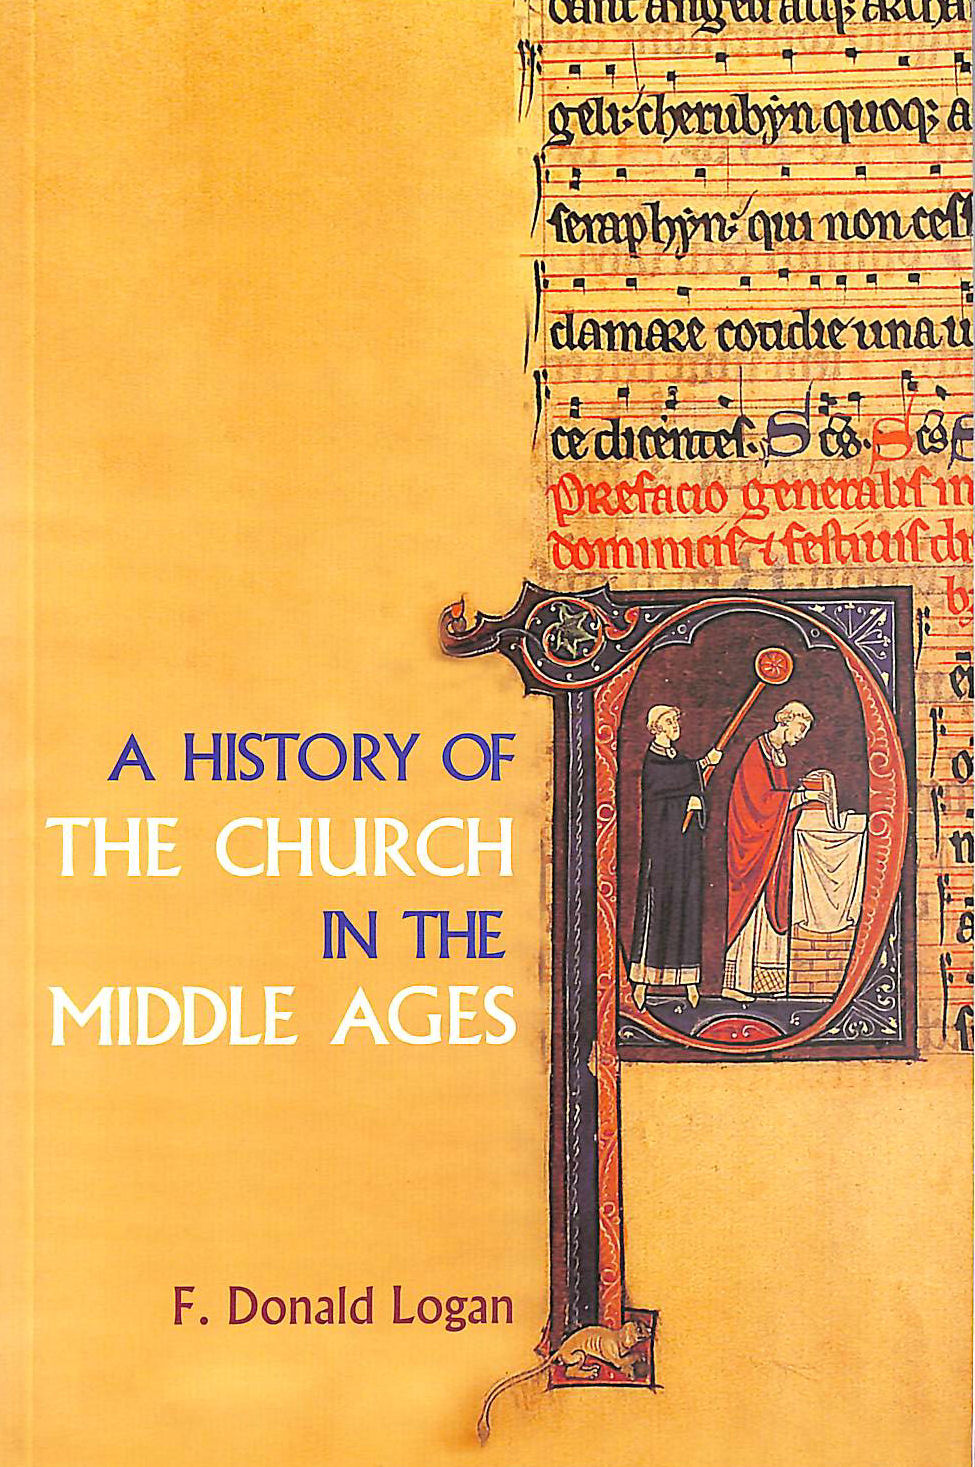 LOGAN, F DONALD - A History of the Church in the Middle Ages